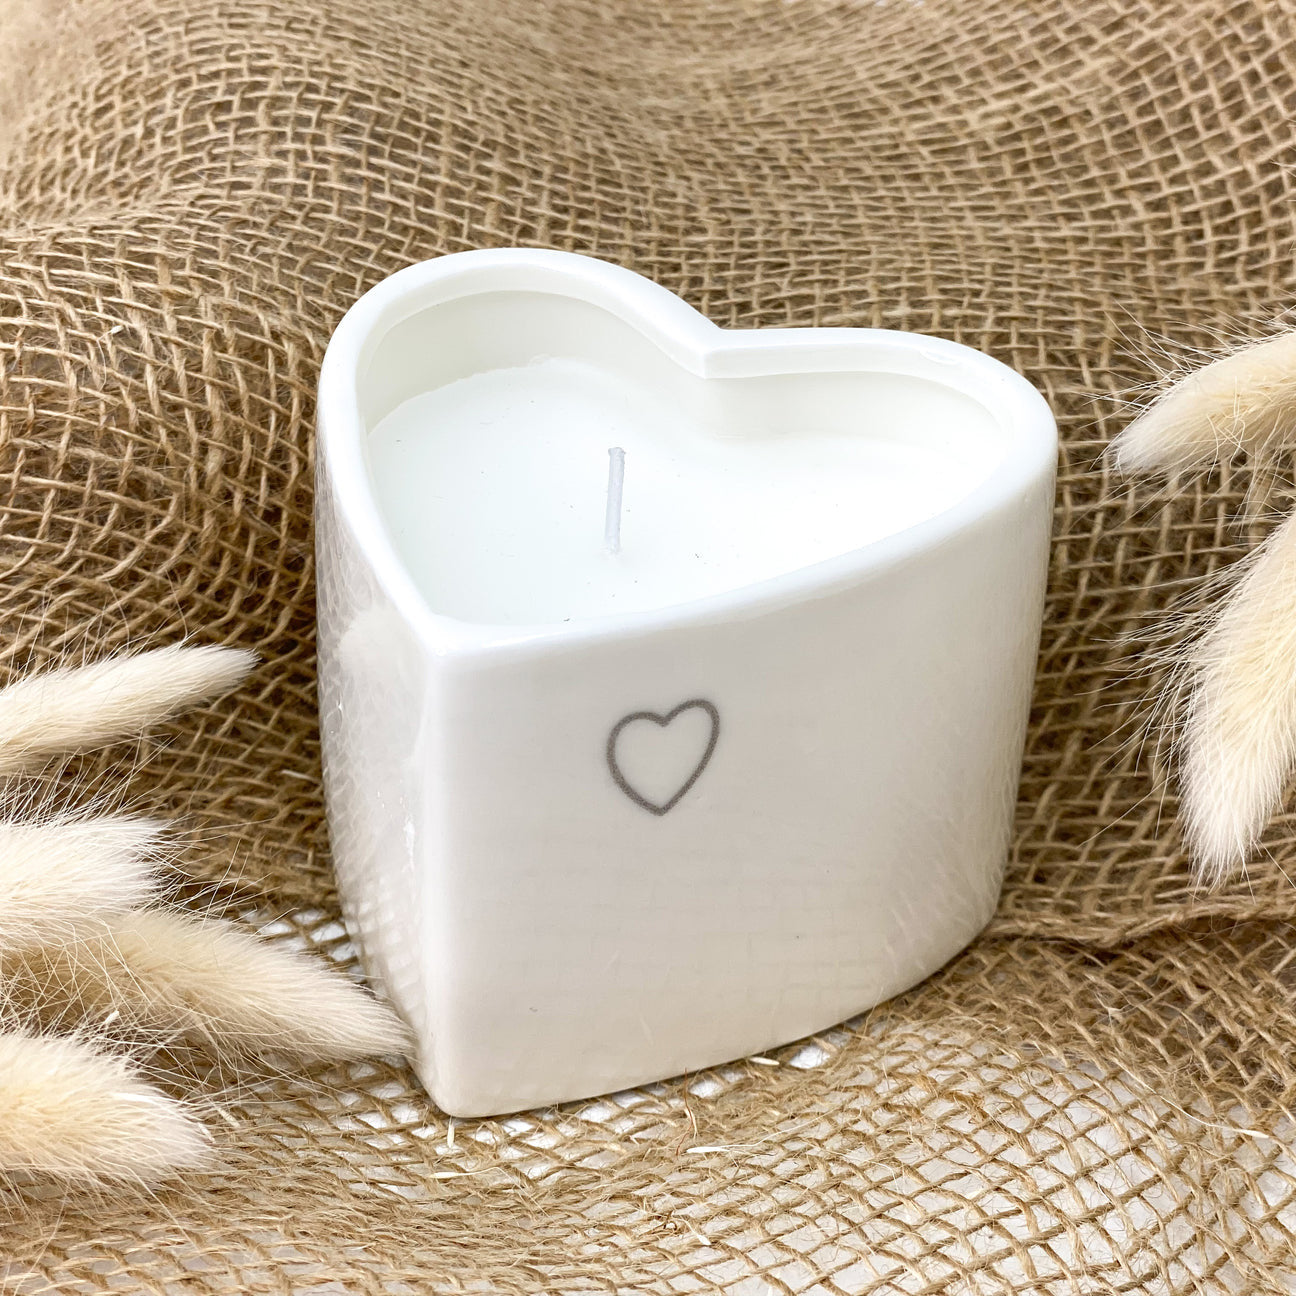 Transomnia Evie Heart Shaped Candle in Pot